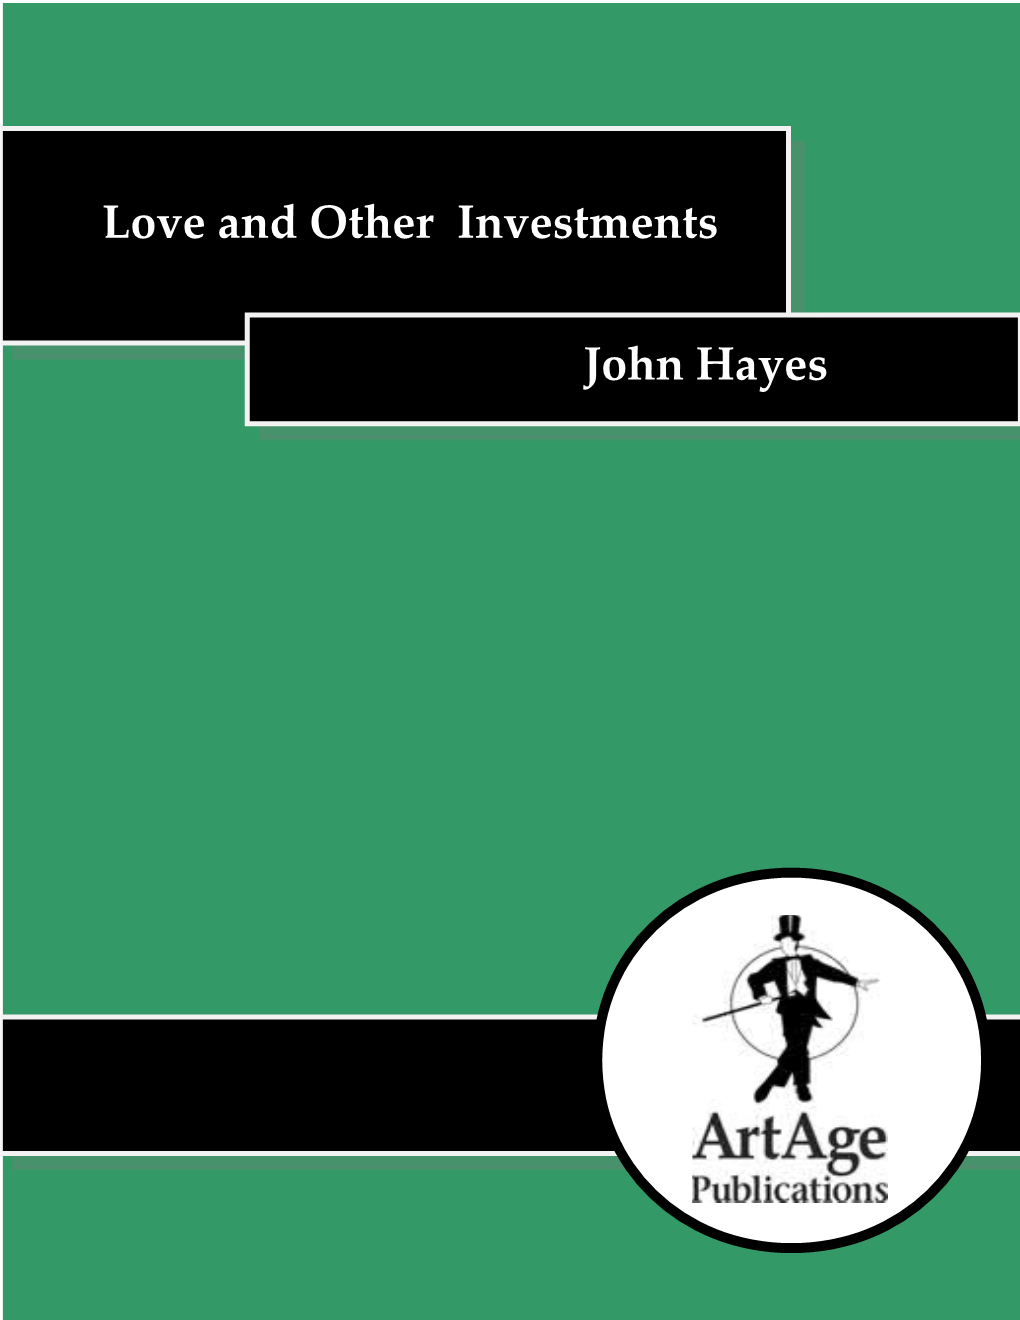 Love and Other Investments